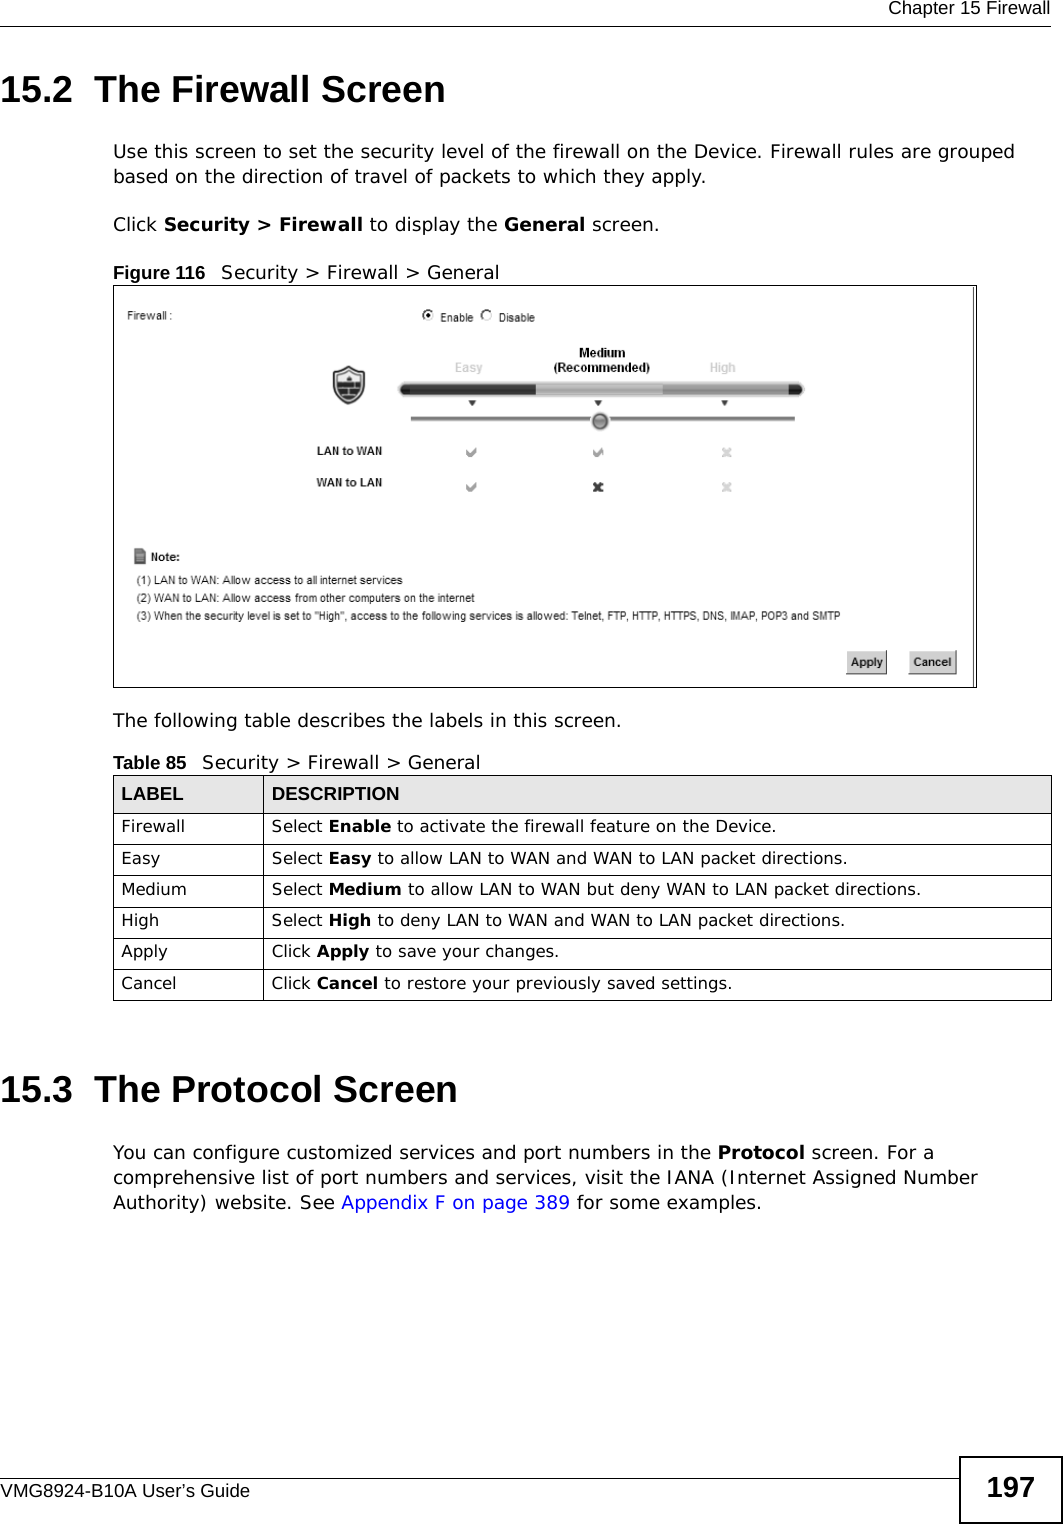  Chapter 15 FirewallVMG8924-B10A User’s Guide 19715.2  The Firewall ScreenUse this screen to set the security level of the firewall on the Device. Firewall rules are grouped based on the direction of travel of packets to which they apply. Click Security &gt; Firewall to display the General screen. Figure 116   Security &gt; Firewall &gt; GeneralThe following table describes the labels in this screen.15.3  The Protocol Screen You can configure customized services and port numbers in the Protocol screen. For a comprehensive list of port numbers and services, visit the IANA (Internet Assigned Number Authority) website. See Appendix F on page 389 for some examples. Table 85   Security &gt; Firewall &gt; GeneralLABEL DESCRIPTIONFirewall Select Enable to activate the firewall feature on the Device.Easy Select Easy to allow LAN to WAN and WAN to LAN packet directions.Medium Select Medium to allow LAN to WAN but deny WAN to LAN packet directions.High Select High to deny LAN to WAN and WAN to LAN packet directions.Apply Click Apply to save your changes.Cancel Click Cancel to restore your previously saved settings.